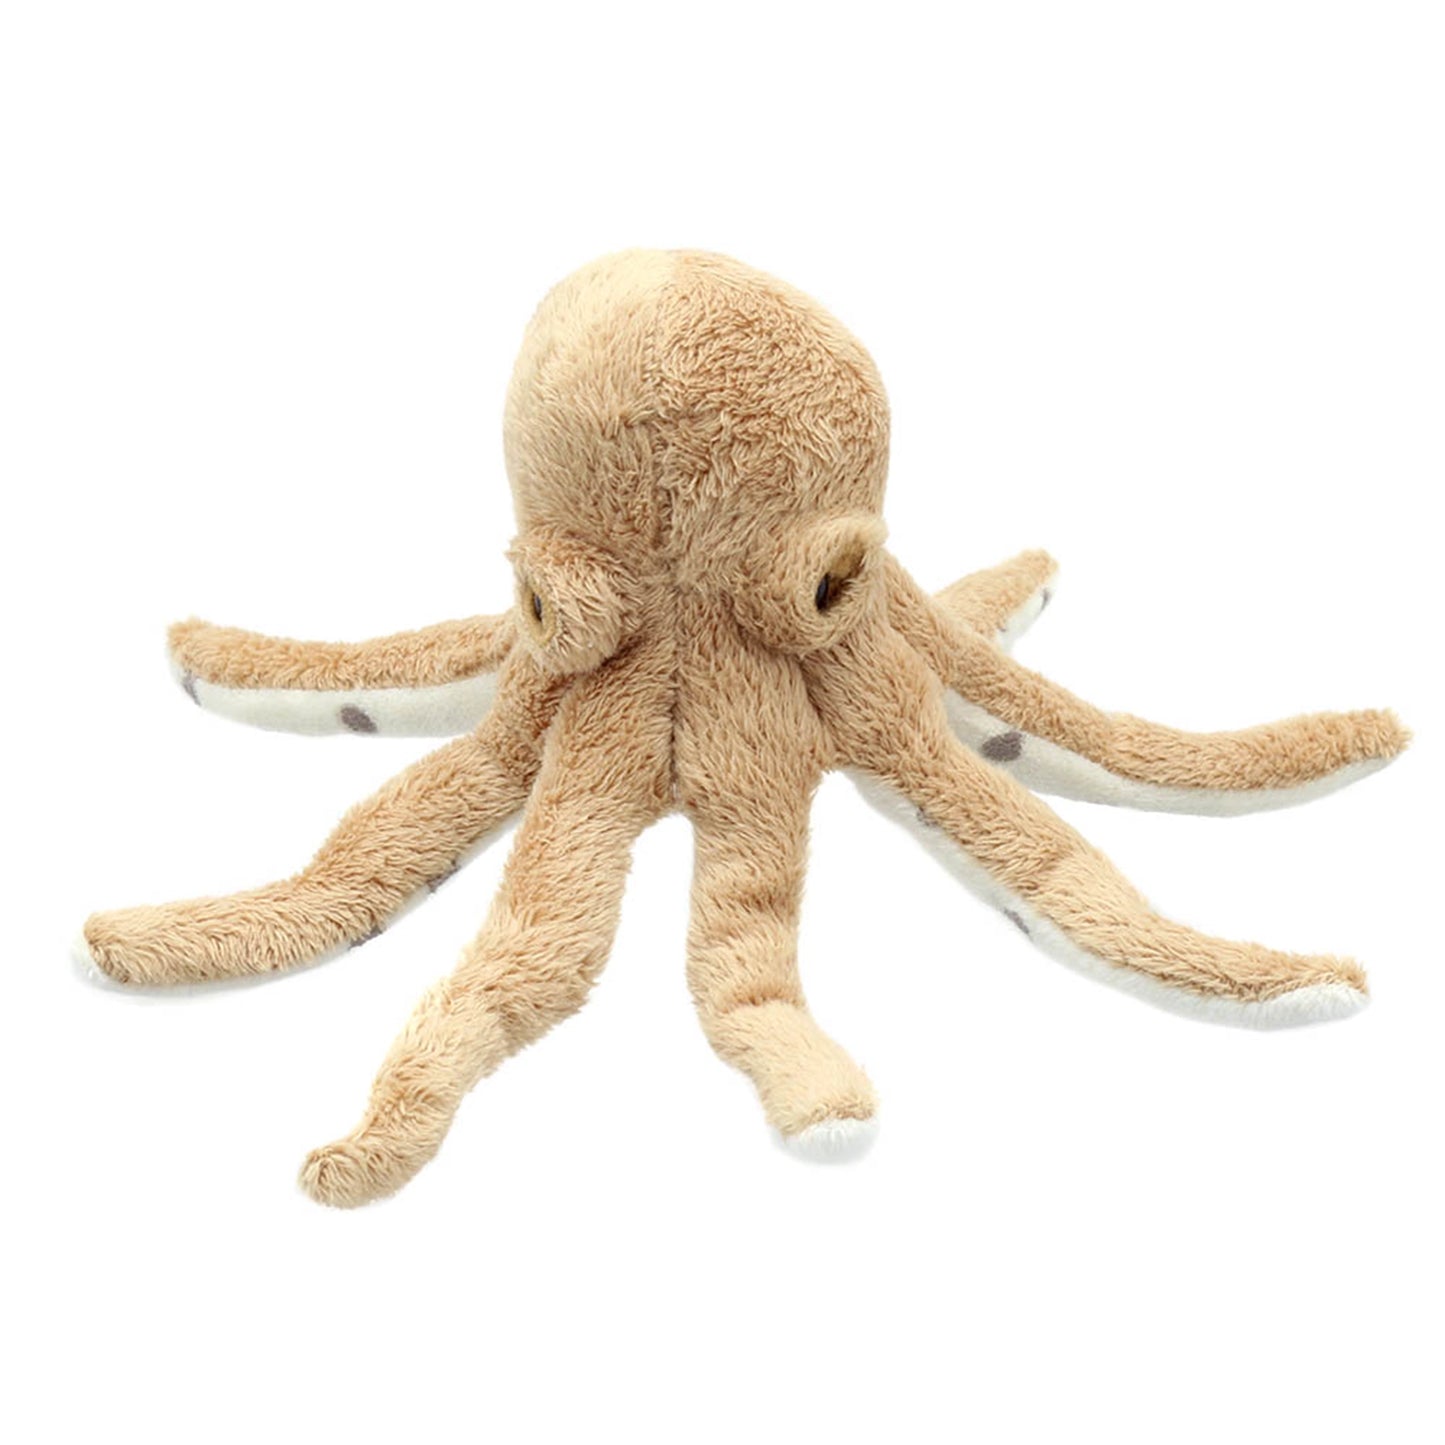 Octopus Finger Puppet - The Puppet Company - The Forgotten Toy Shop